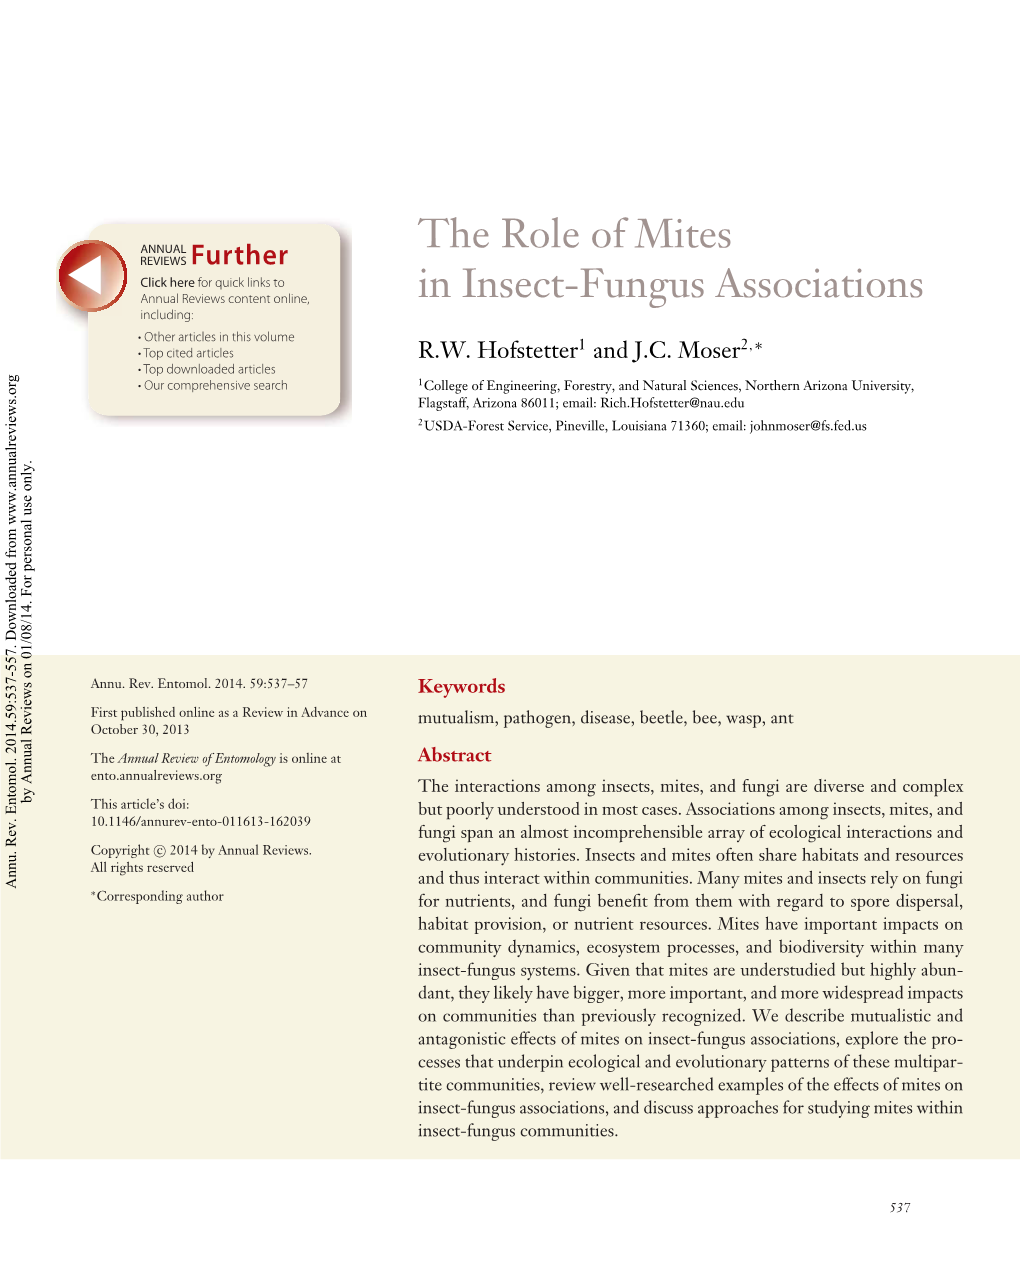 The Role of Mites in Insect-Fungus Associations